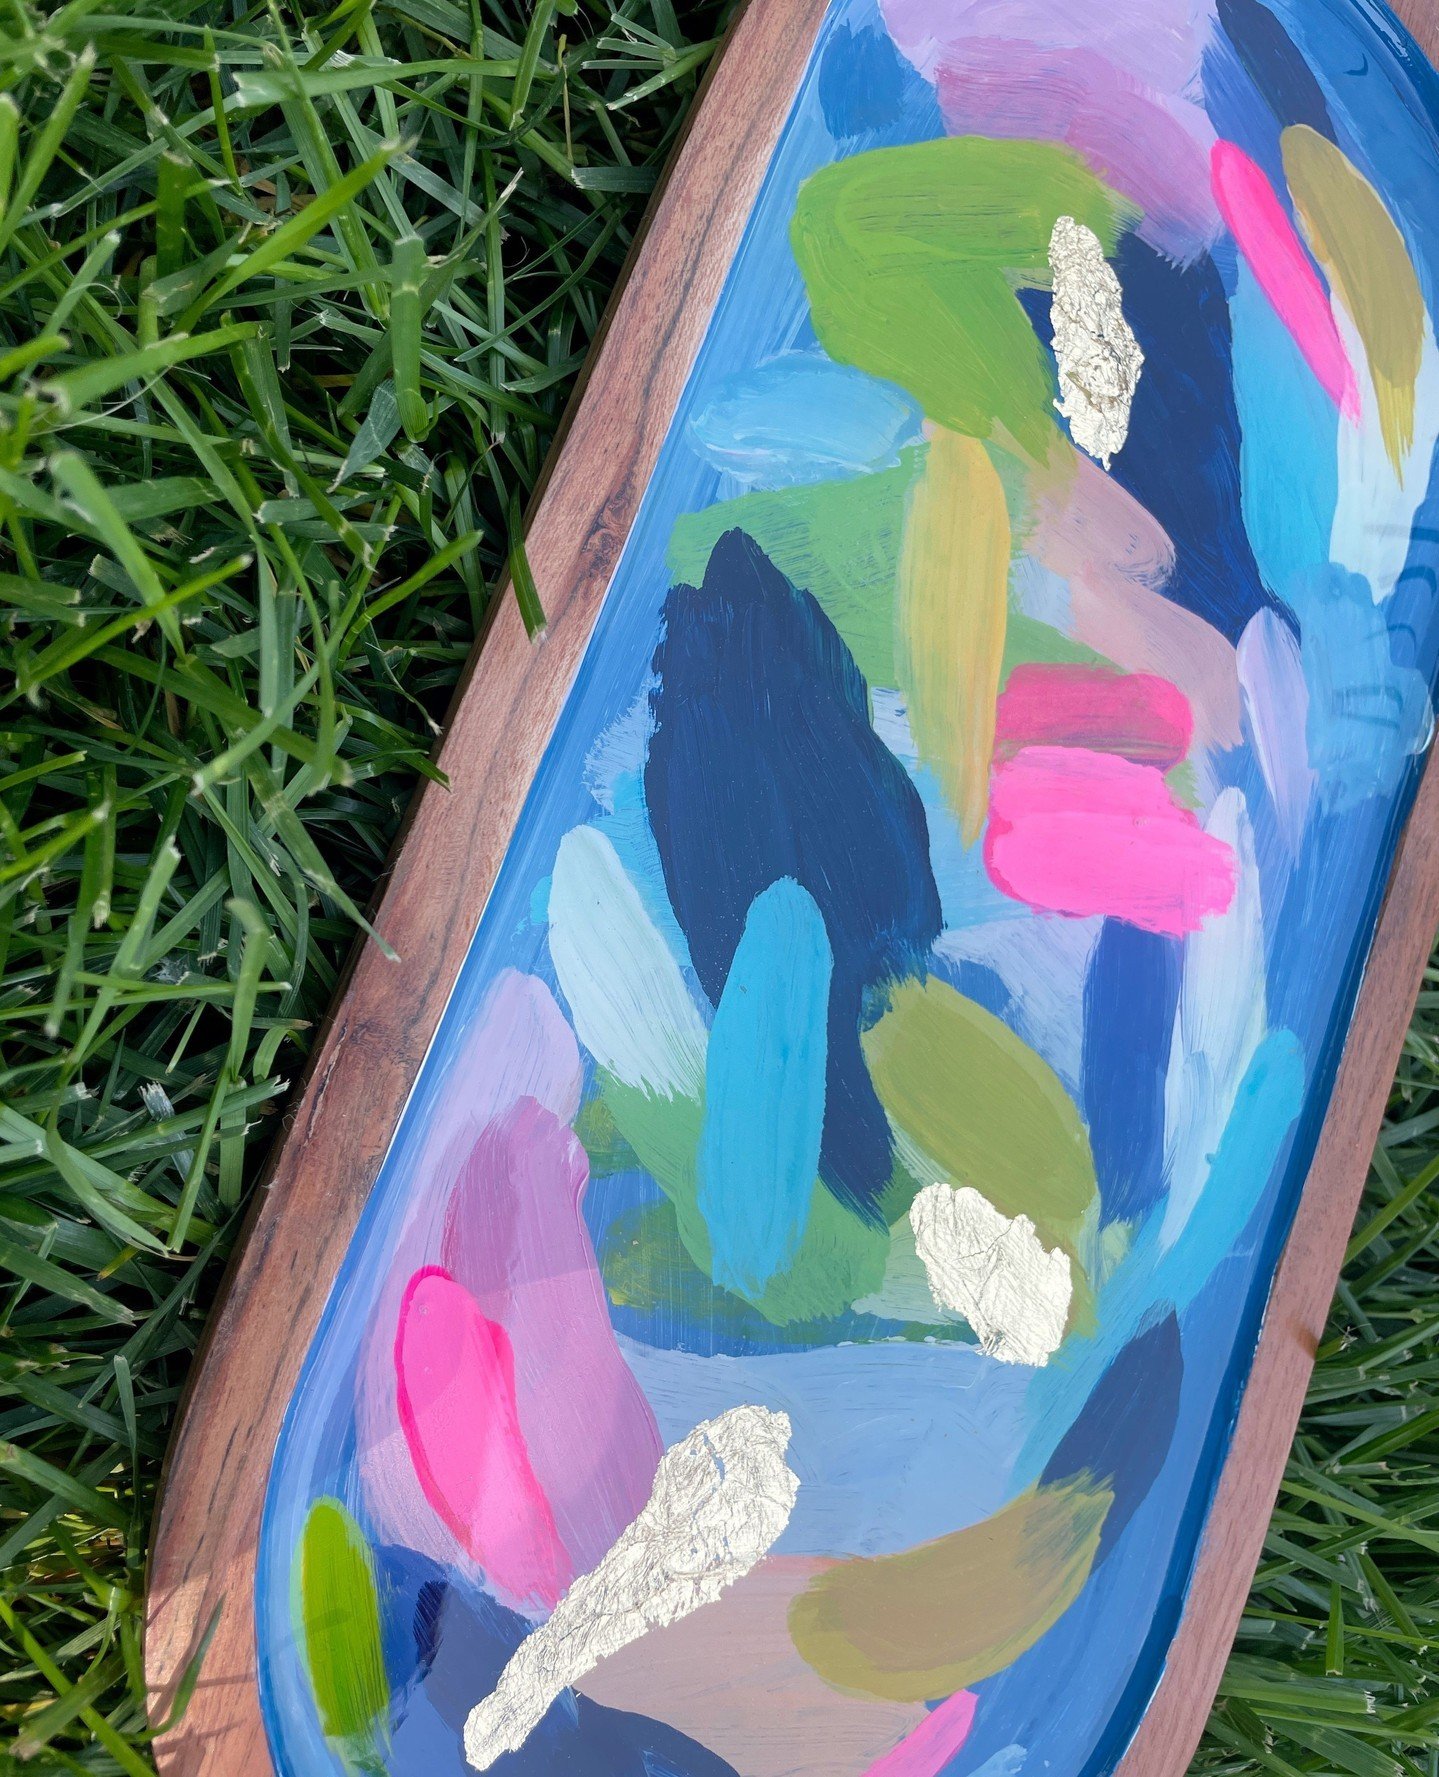 If you are looking for that special Mother&rsquo;s Day present, here it is! Don&rsquo;t settle for something ordinary when you can have something unique! ⁠
⁠
This tray and others are a part of my Spring tray collection at brookeerinharris.com. ⁠
⁠
#d